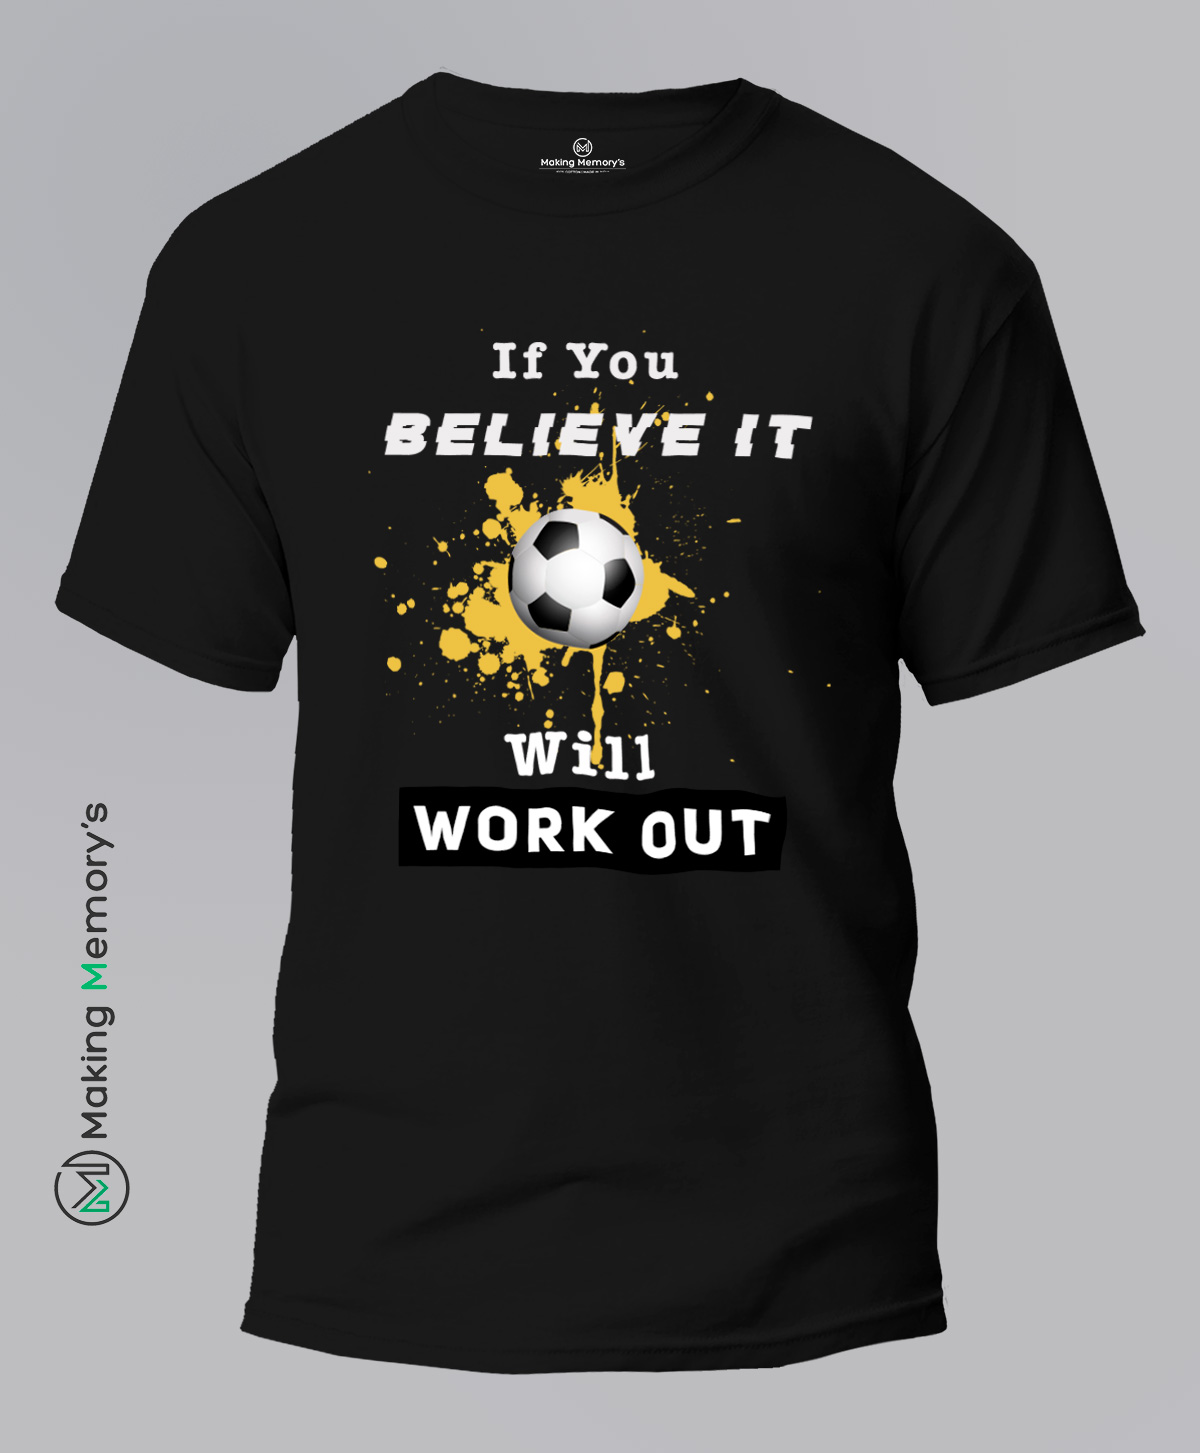 If-You-Believe-It-Will-Work-Out-Black-T-Shirt